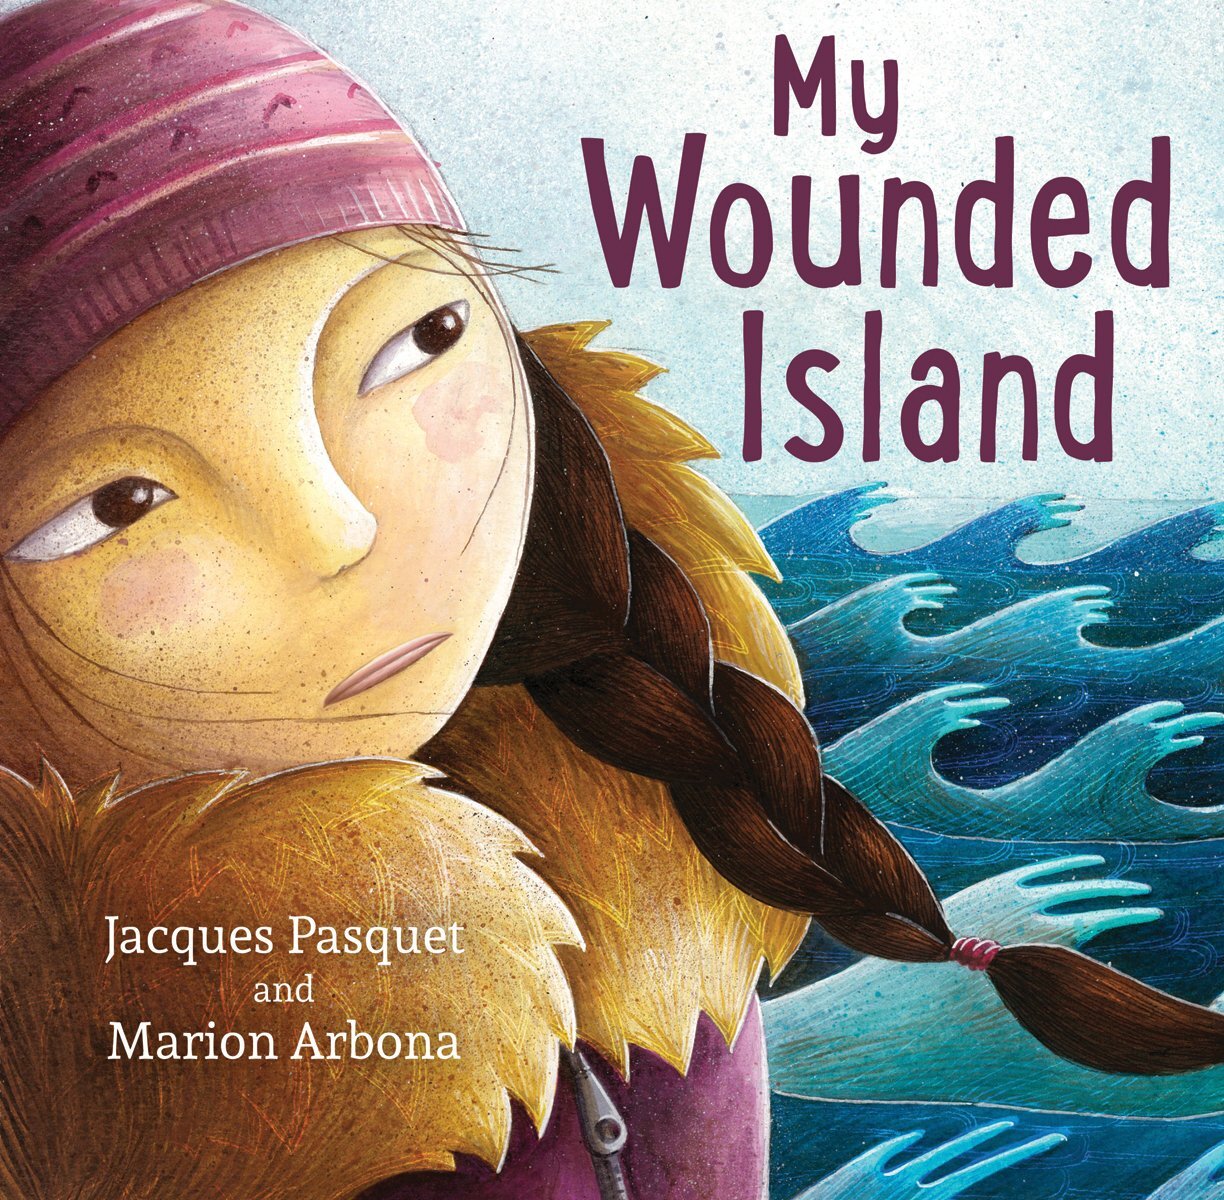 My Wounded Island – Jacques Pasquet